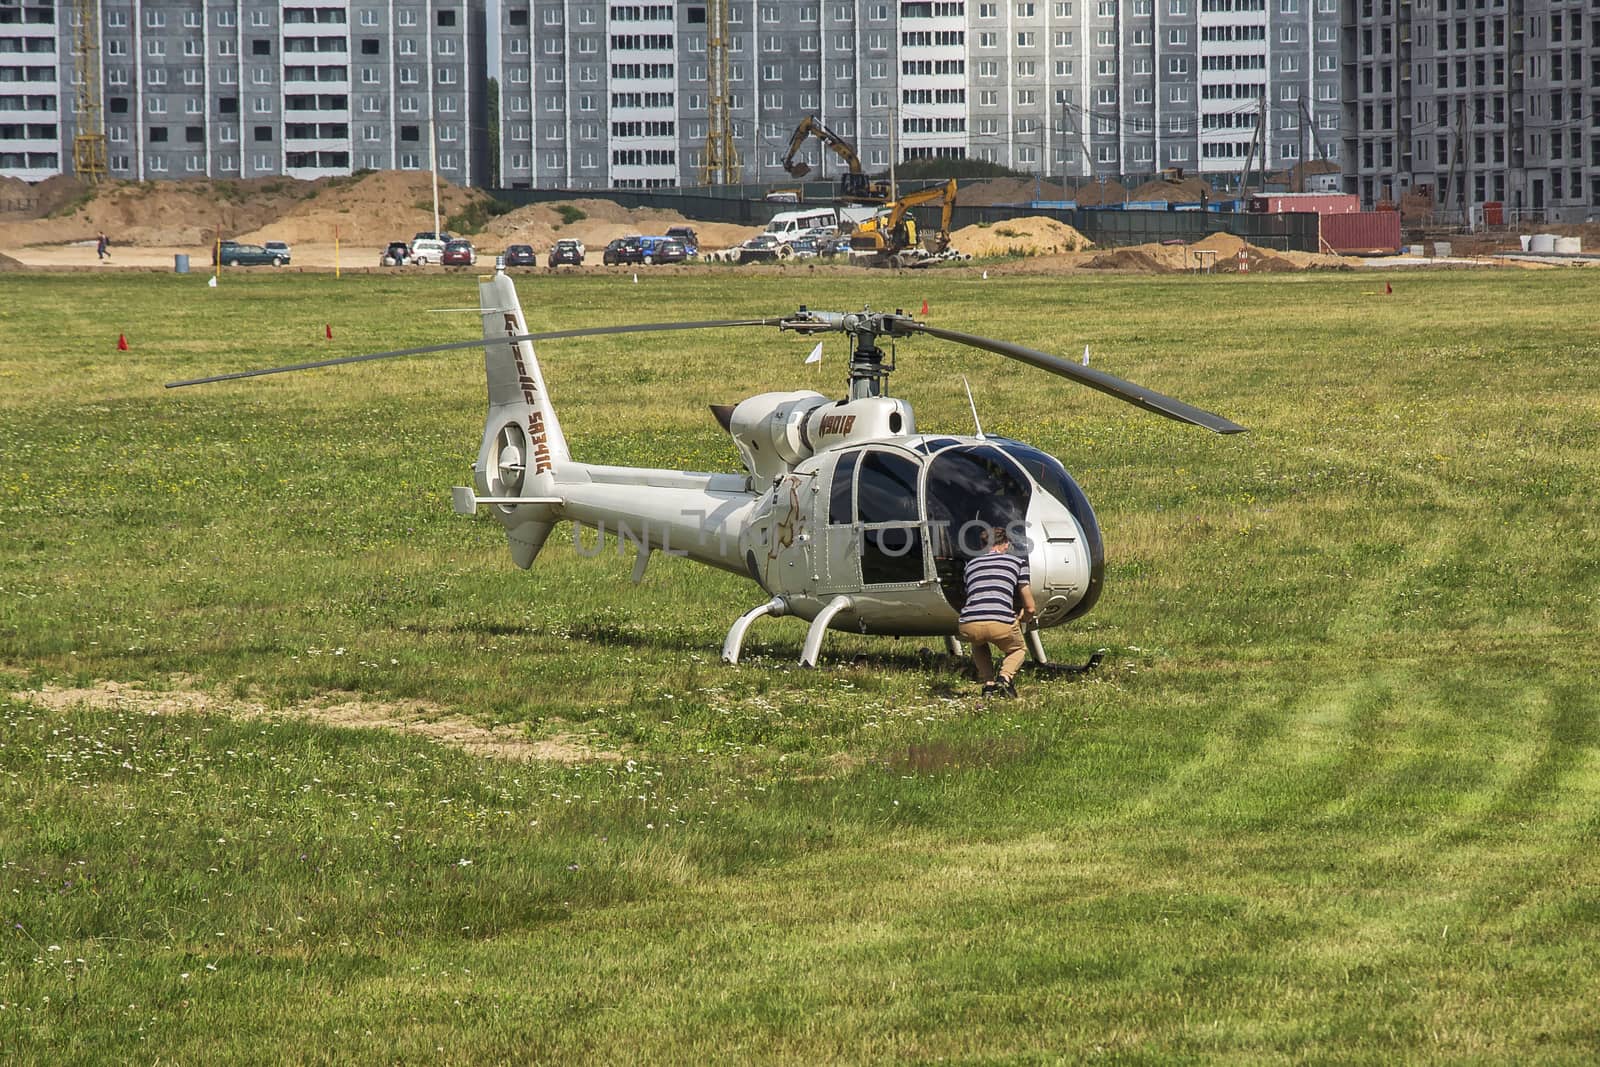 Helicopter participant of the 16th World Helicopter Championship by Grommik